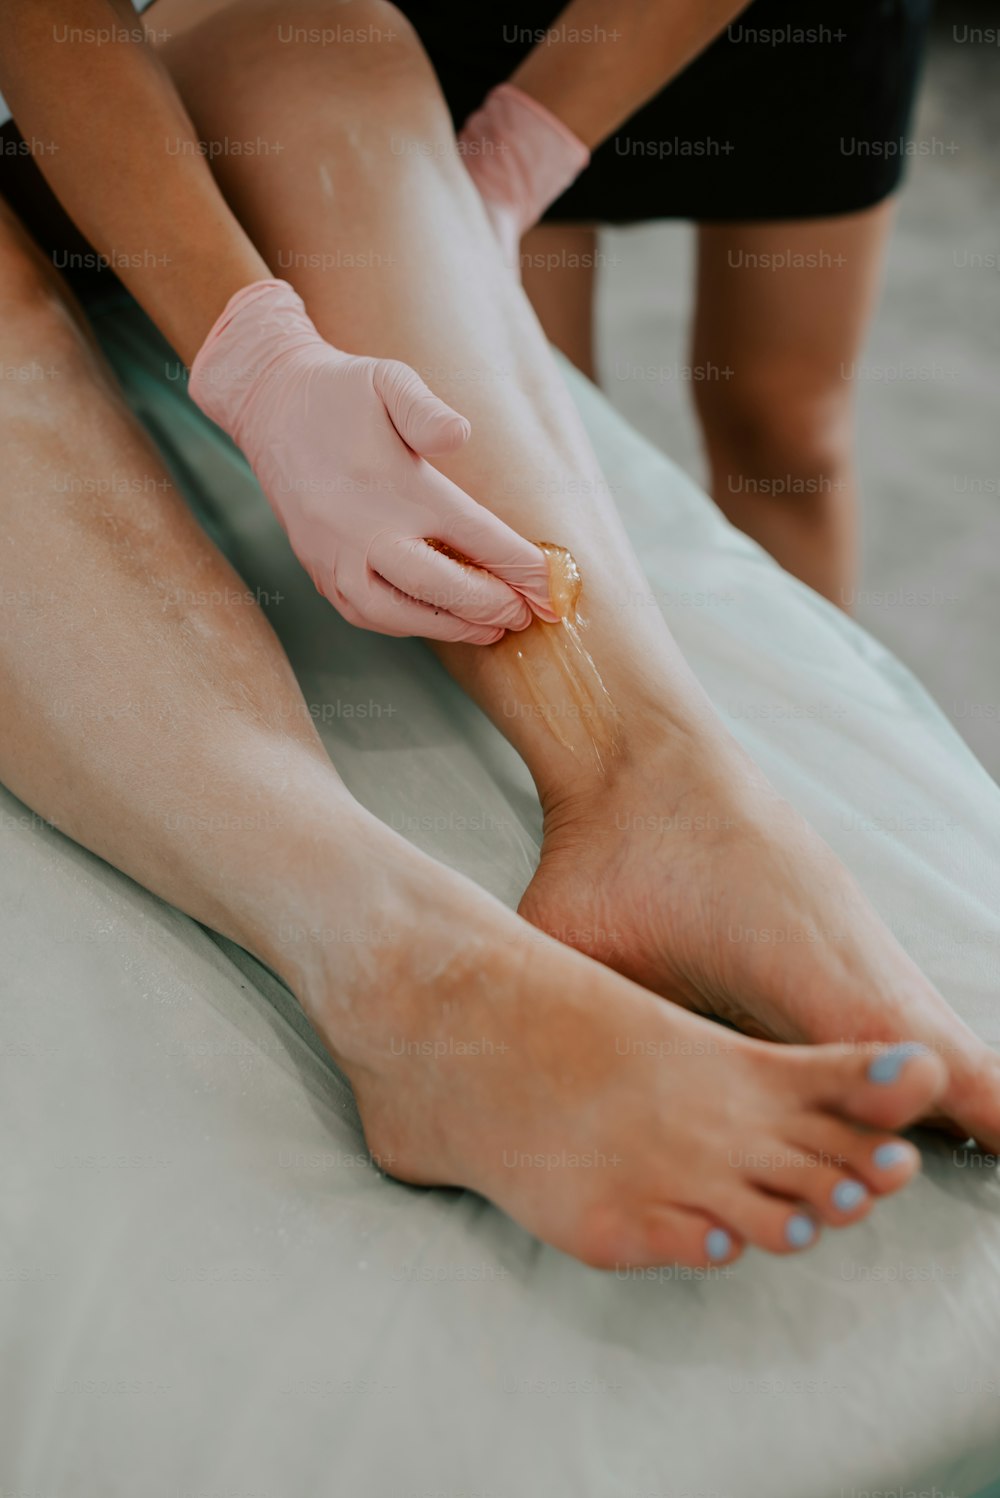 a person getting a foot rub with a rubber glove